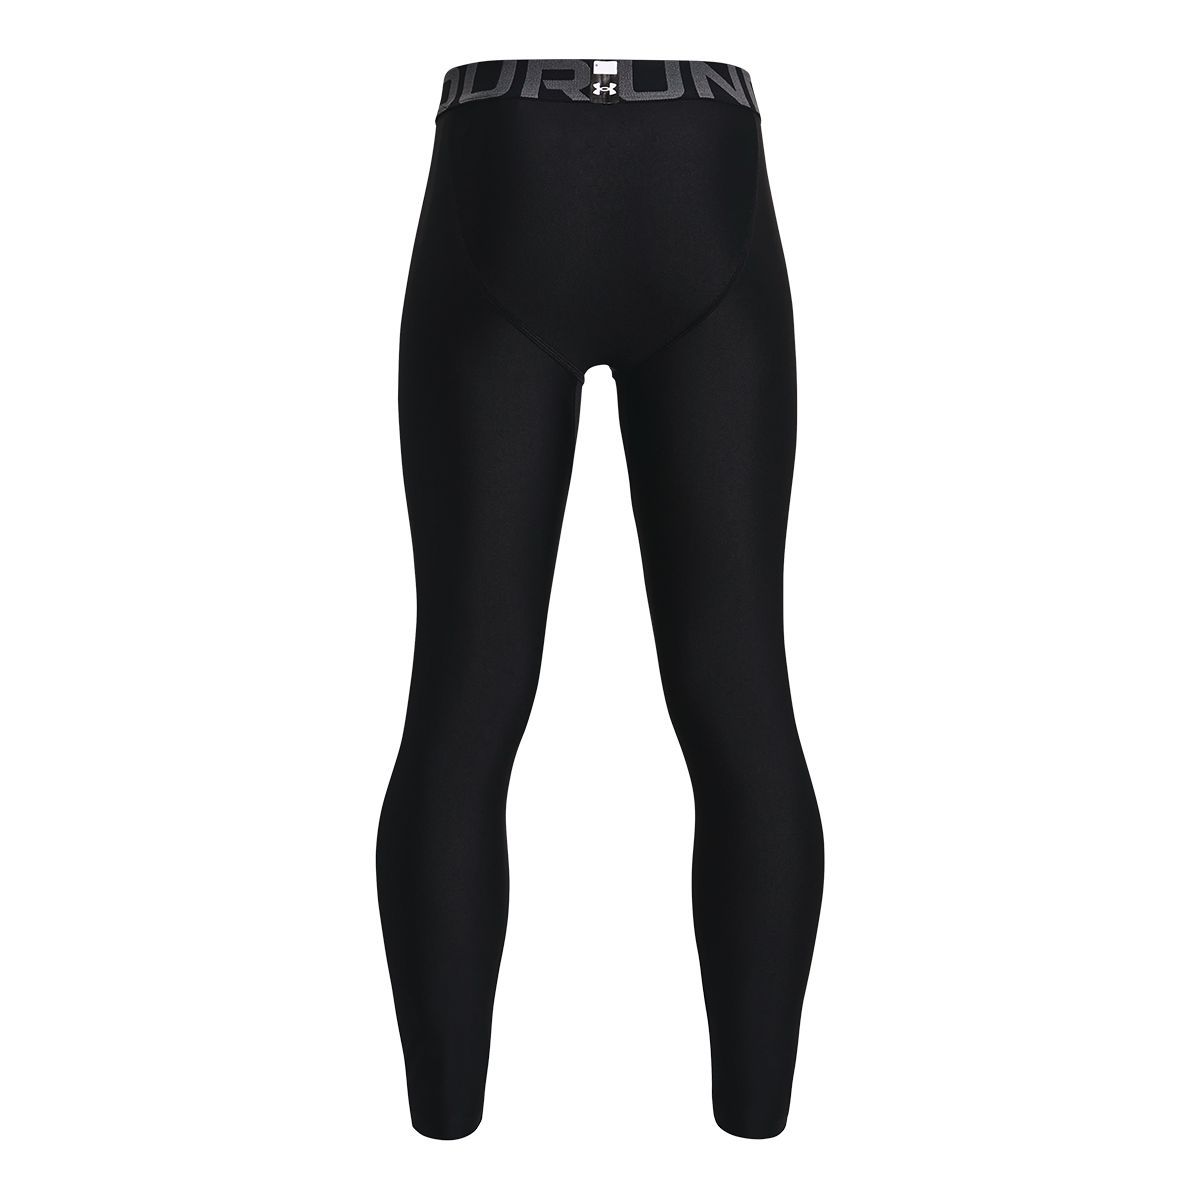 https://media-www.atmosphere.ca/product/div-03-softgoods/dpt-72-casual-clothing/sdpt-03-boys/333345204/ua-b-hg-armour-legging-q121-black-pitch-gray-xs--cba011d5-95d4-4e47-b098-75f714717842-jpgrendition.jpg?imdensity=1&imwidth=1244&impolicy=mZoom